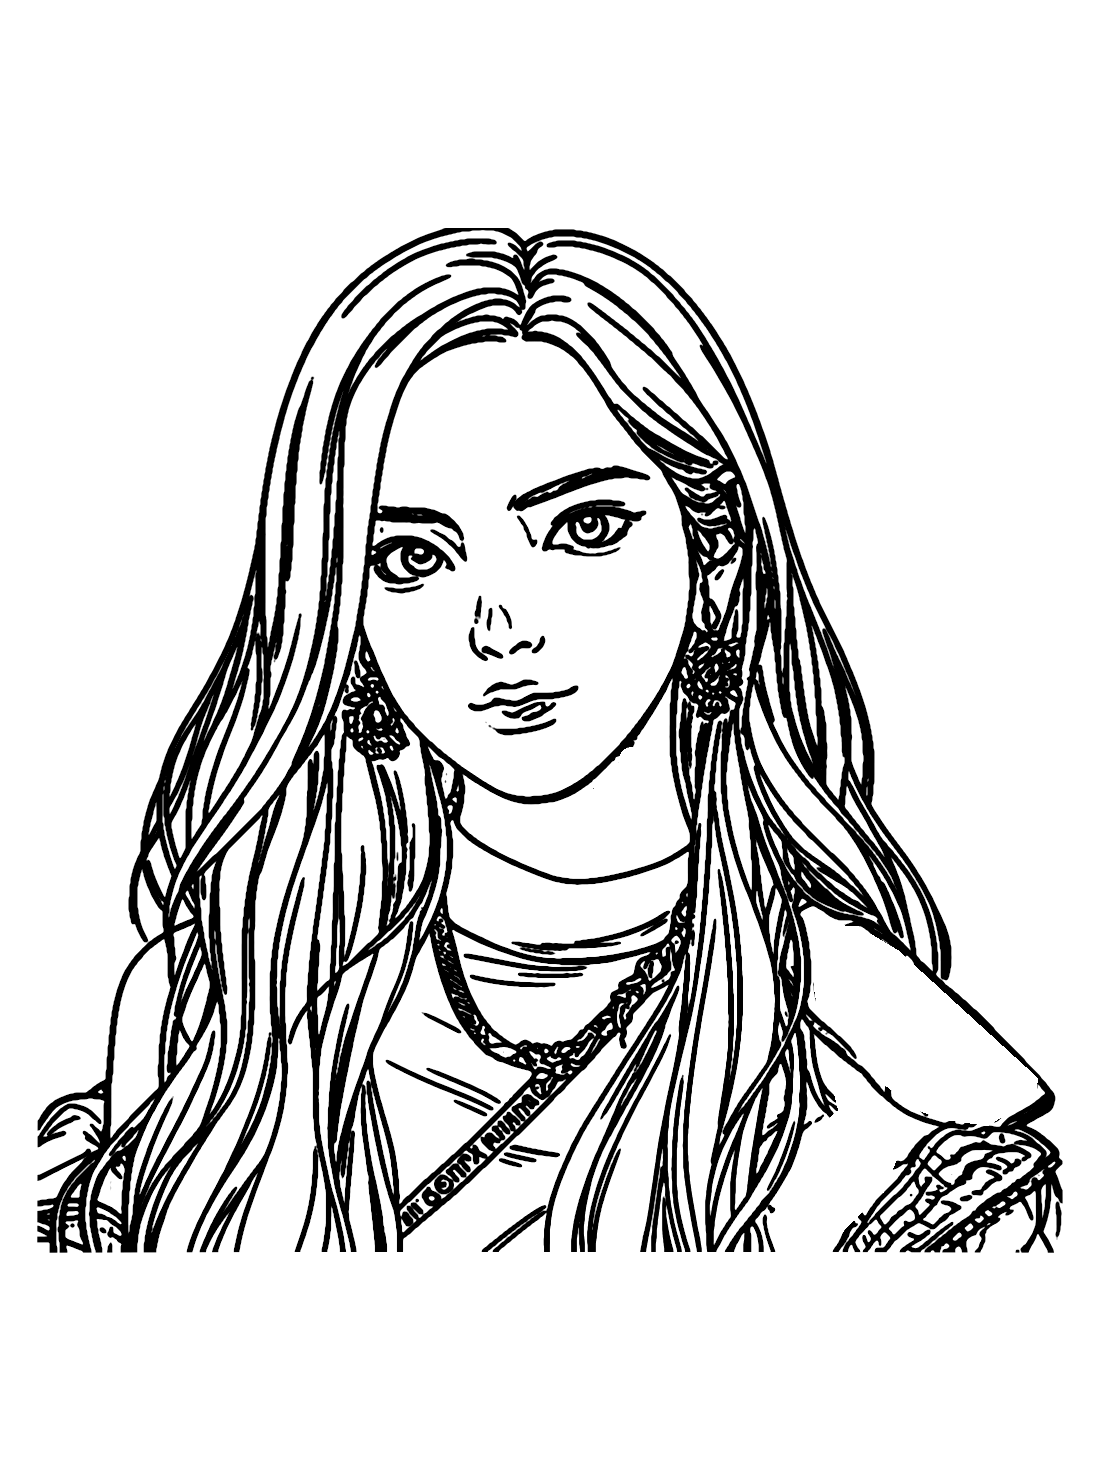 Kpop blackpink coloring pages